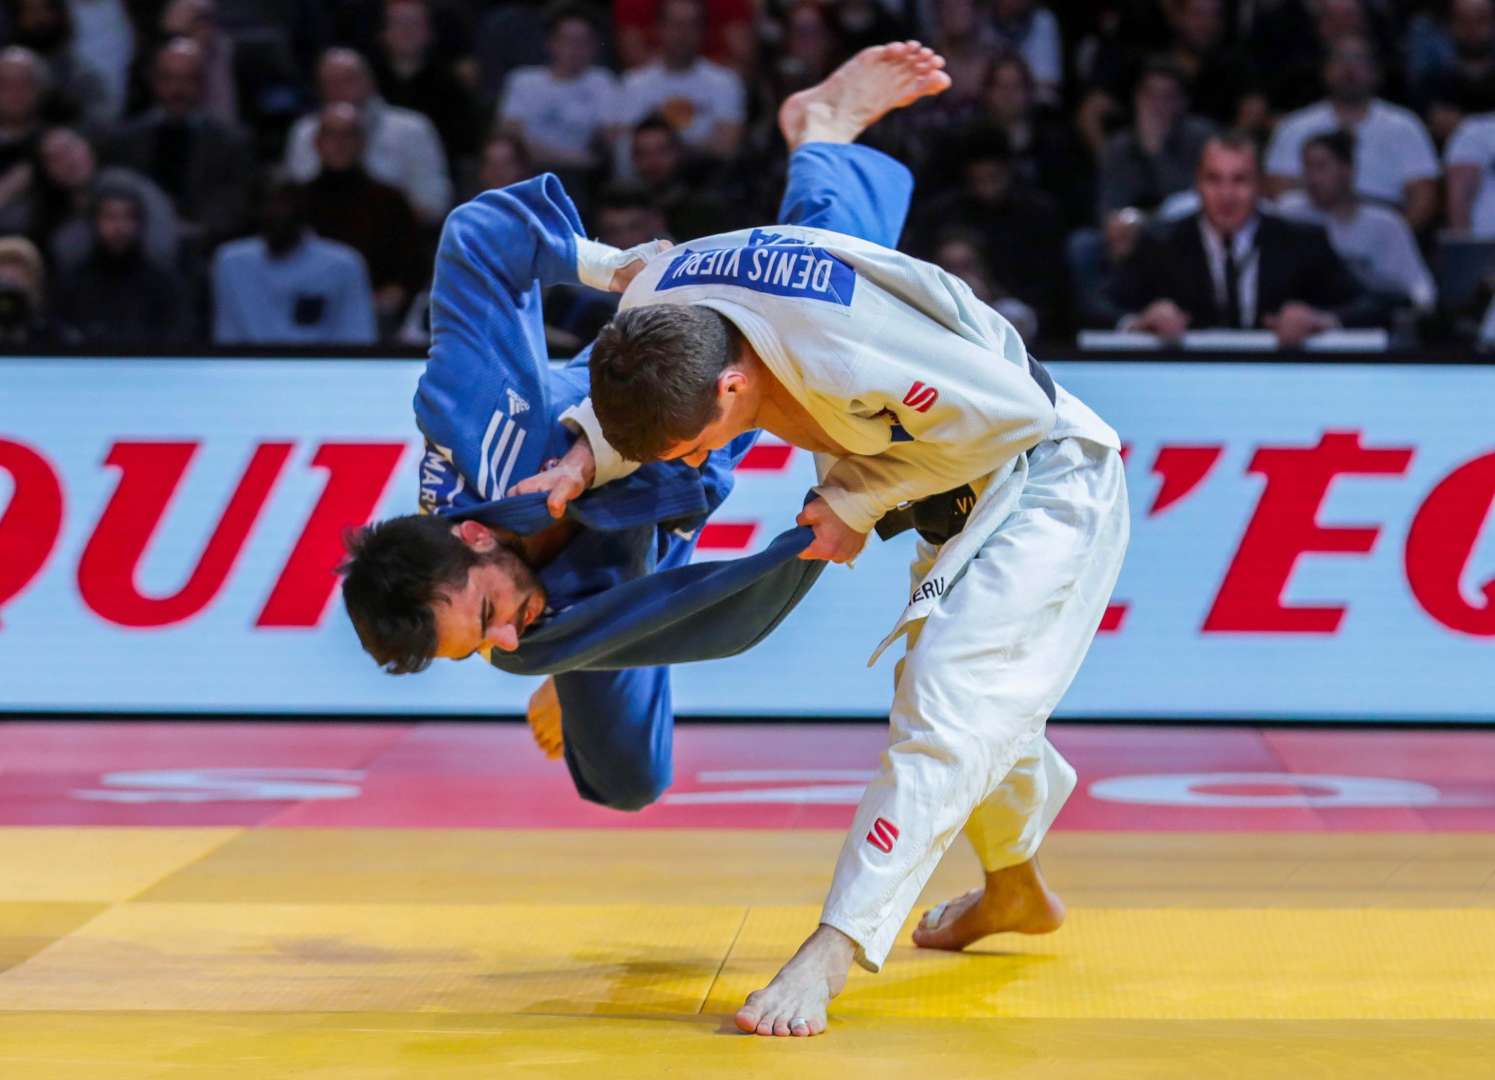 IJF: All Olympic qualification events cancelled until end of April